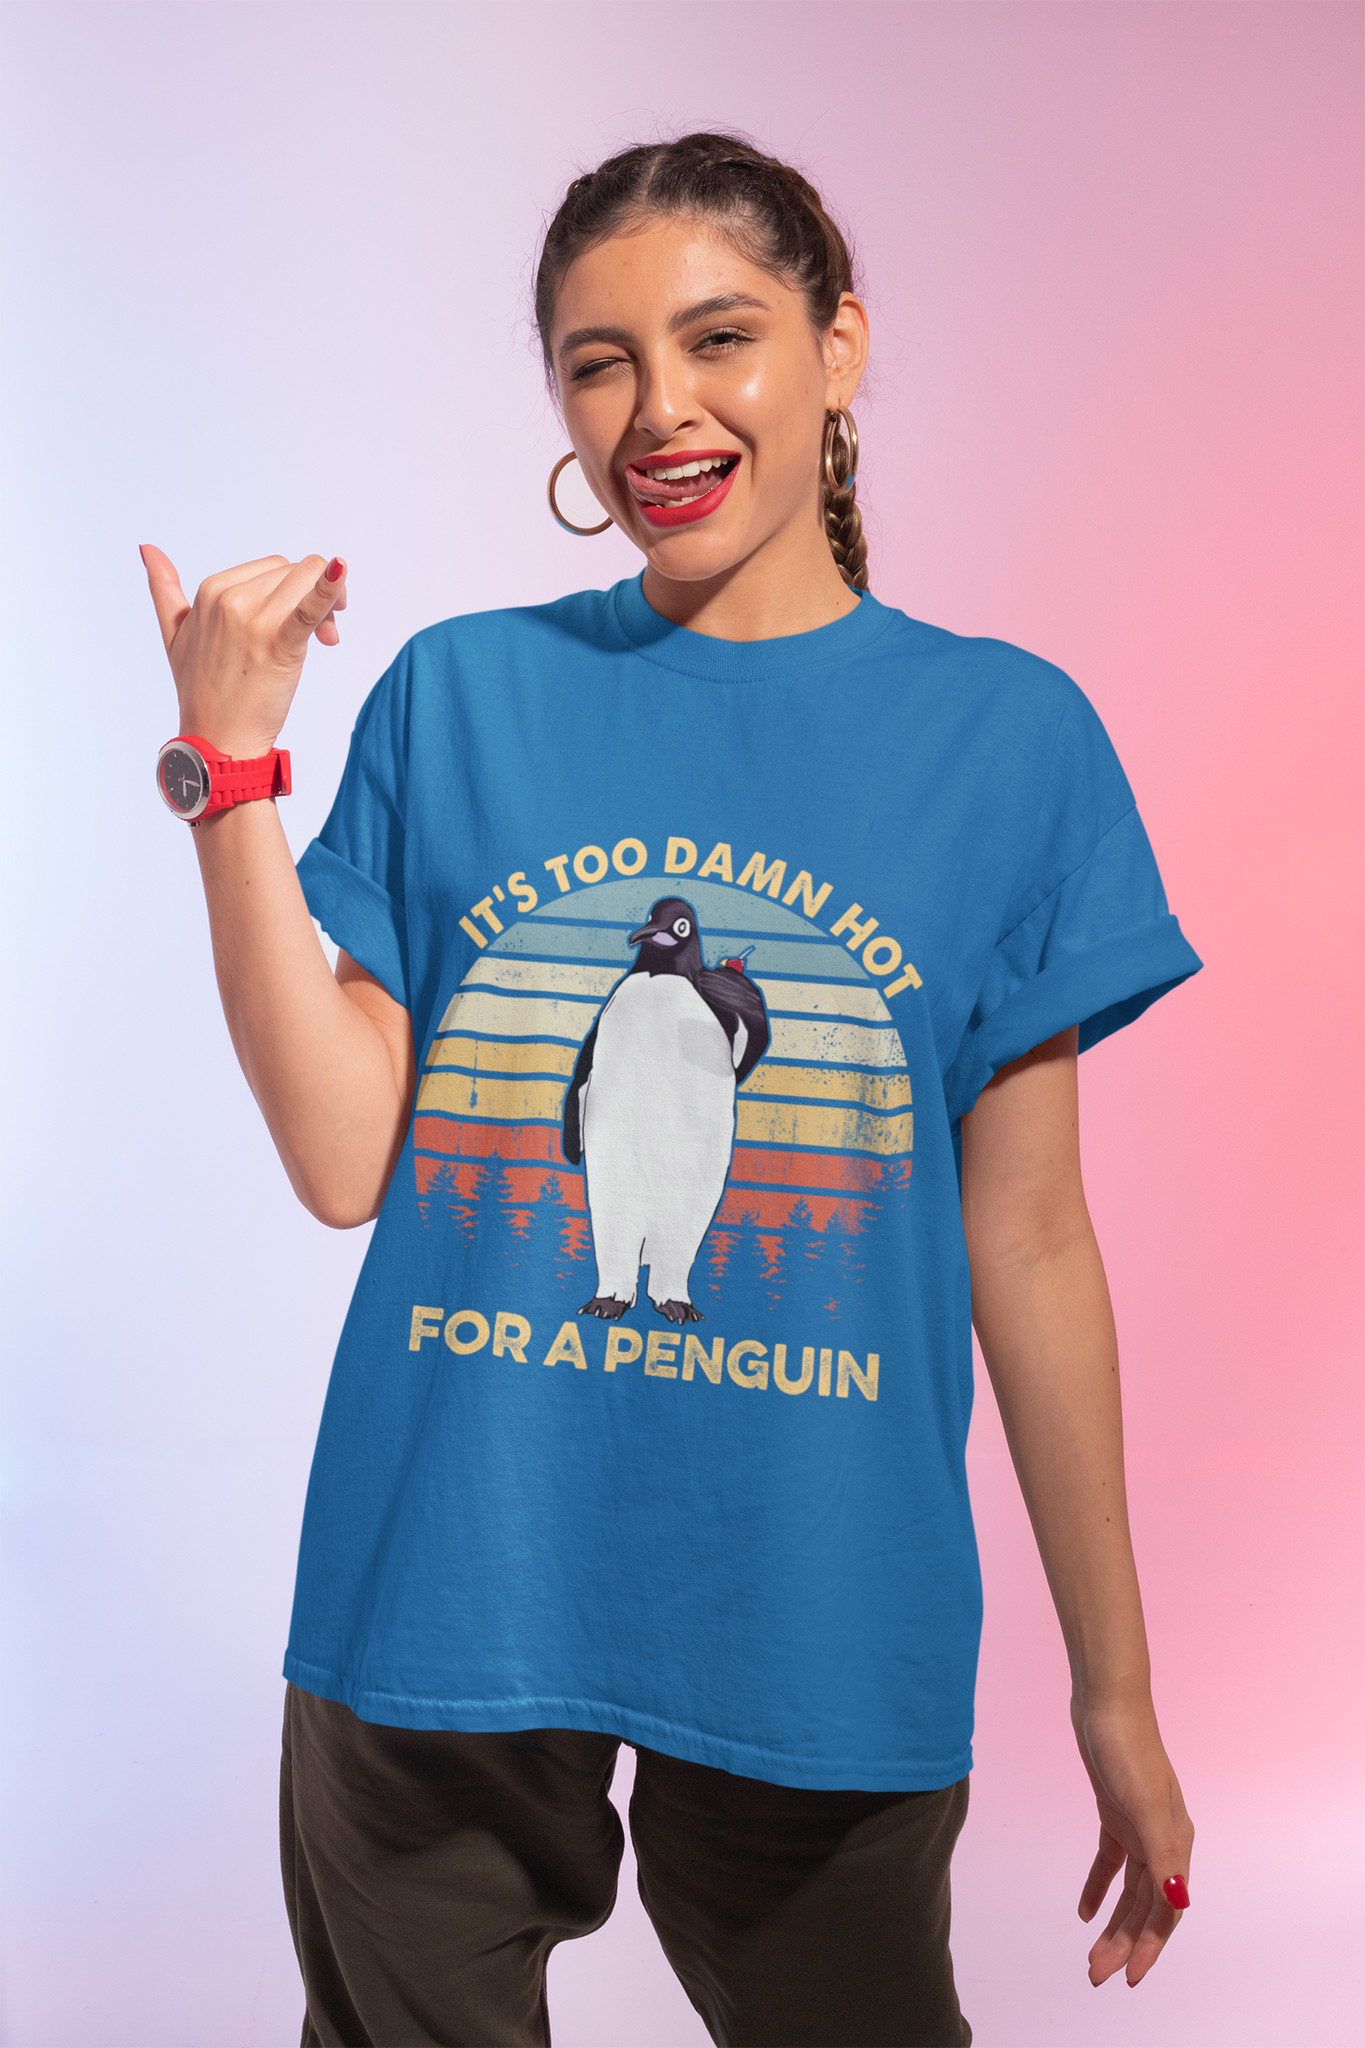 Billy Madison Vintage T Shirt, Its Too Damn Hot For A Penguin Tshirt